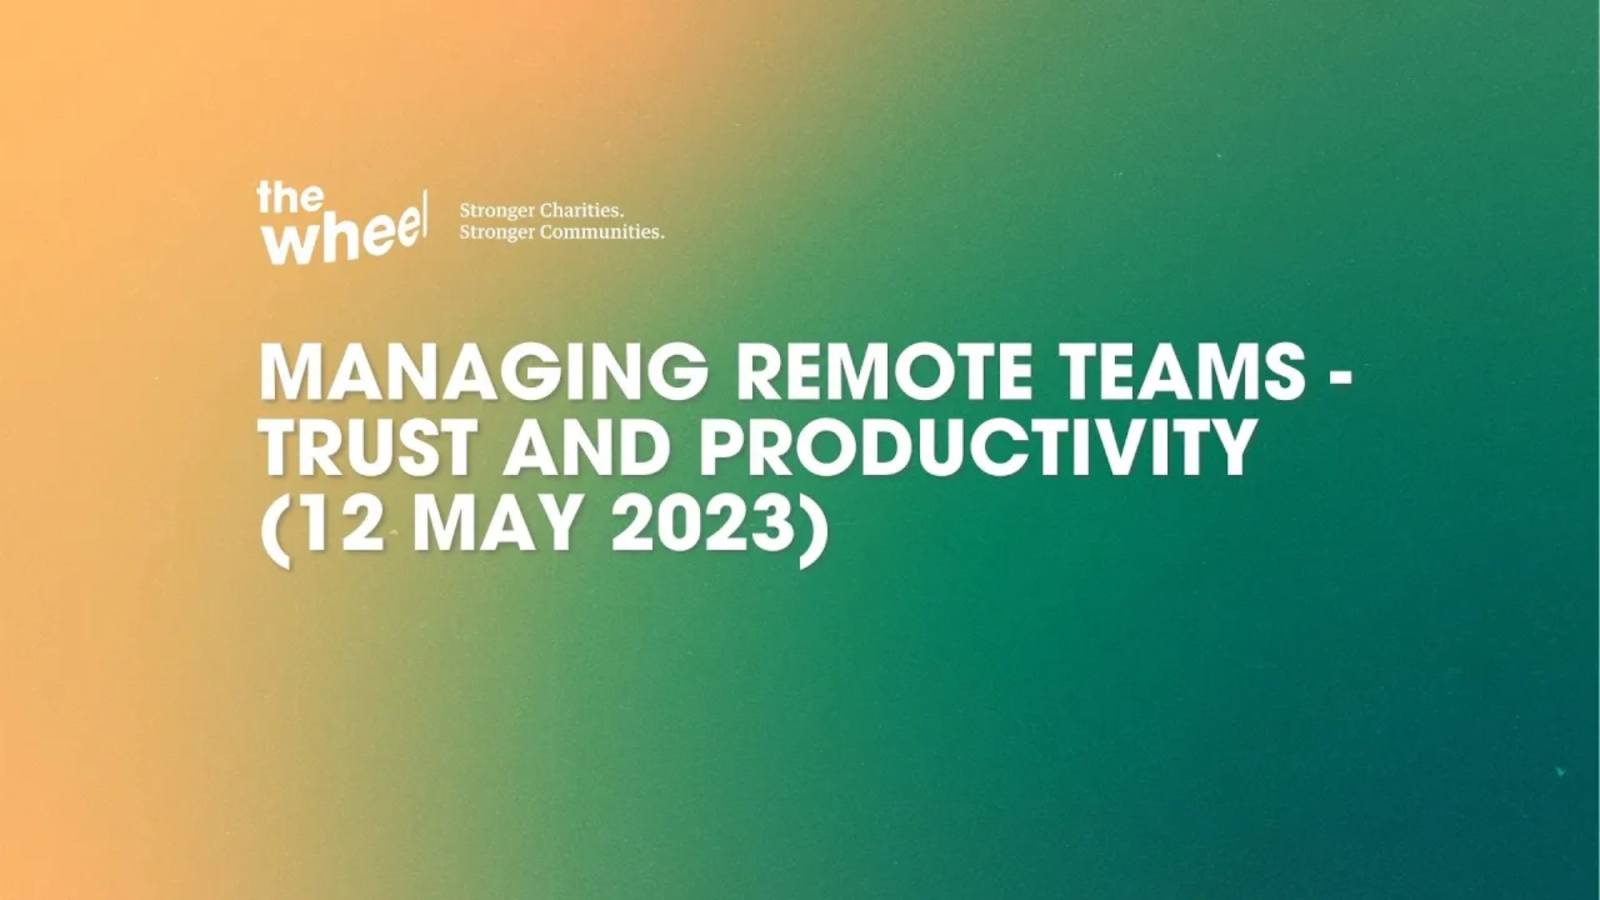 Managing Remote Teams - Trust and Productivity (12 May 2023)